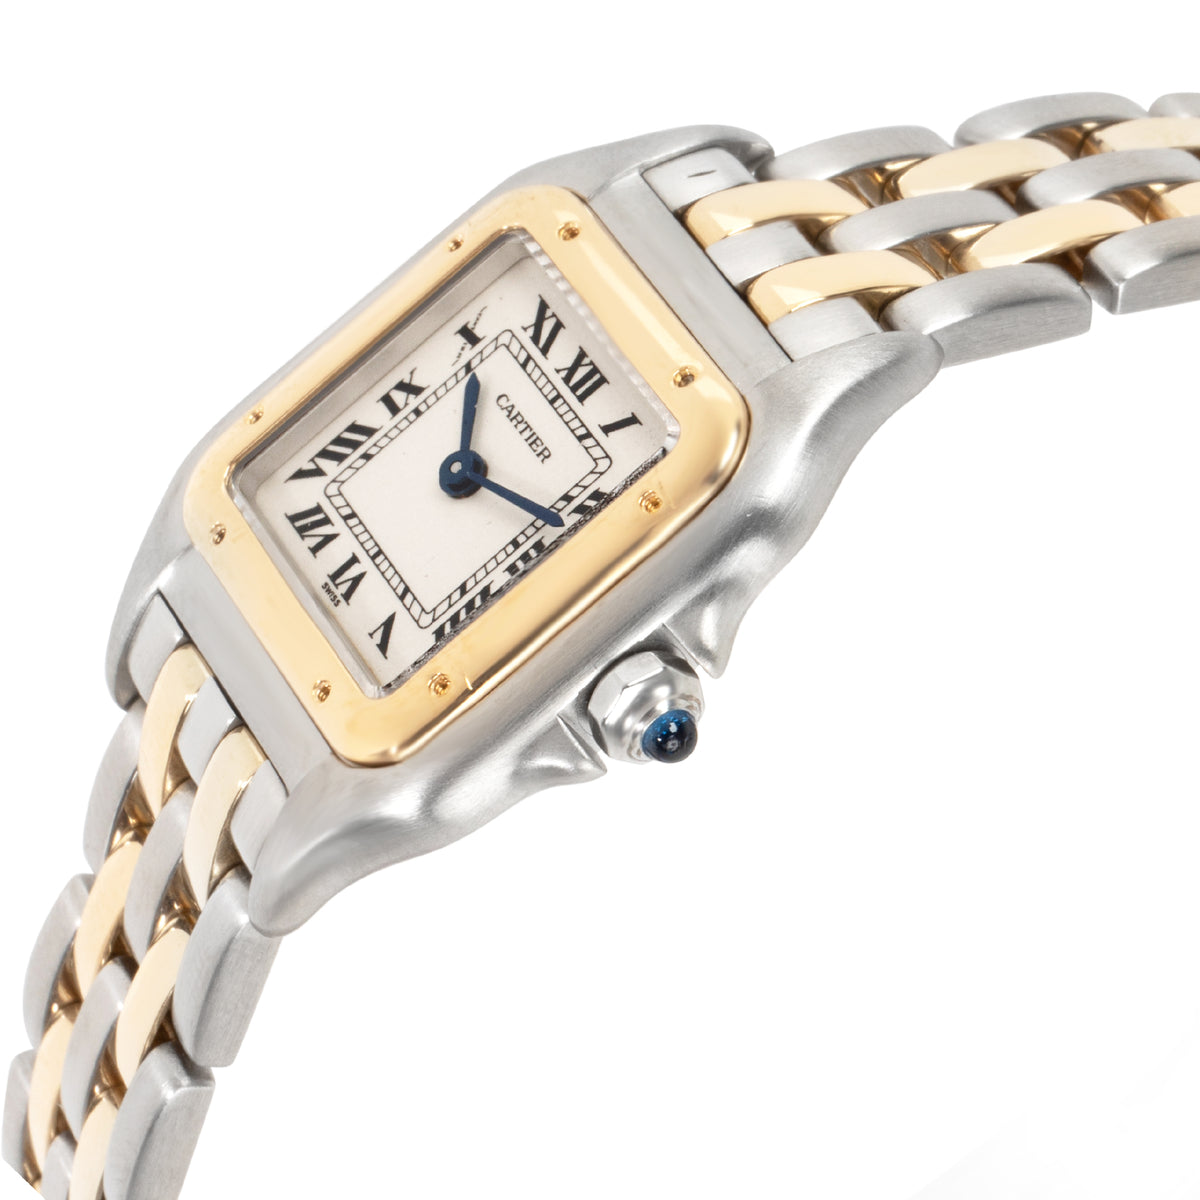 Cartier Panther W25029B6 Women's Watch in 18kt Stainless Steel/Yellow Gold